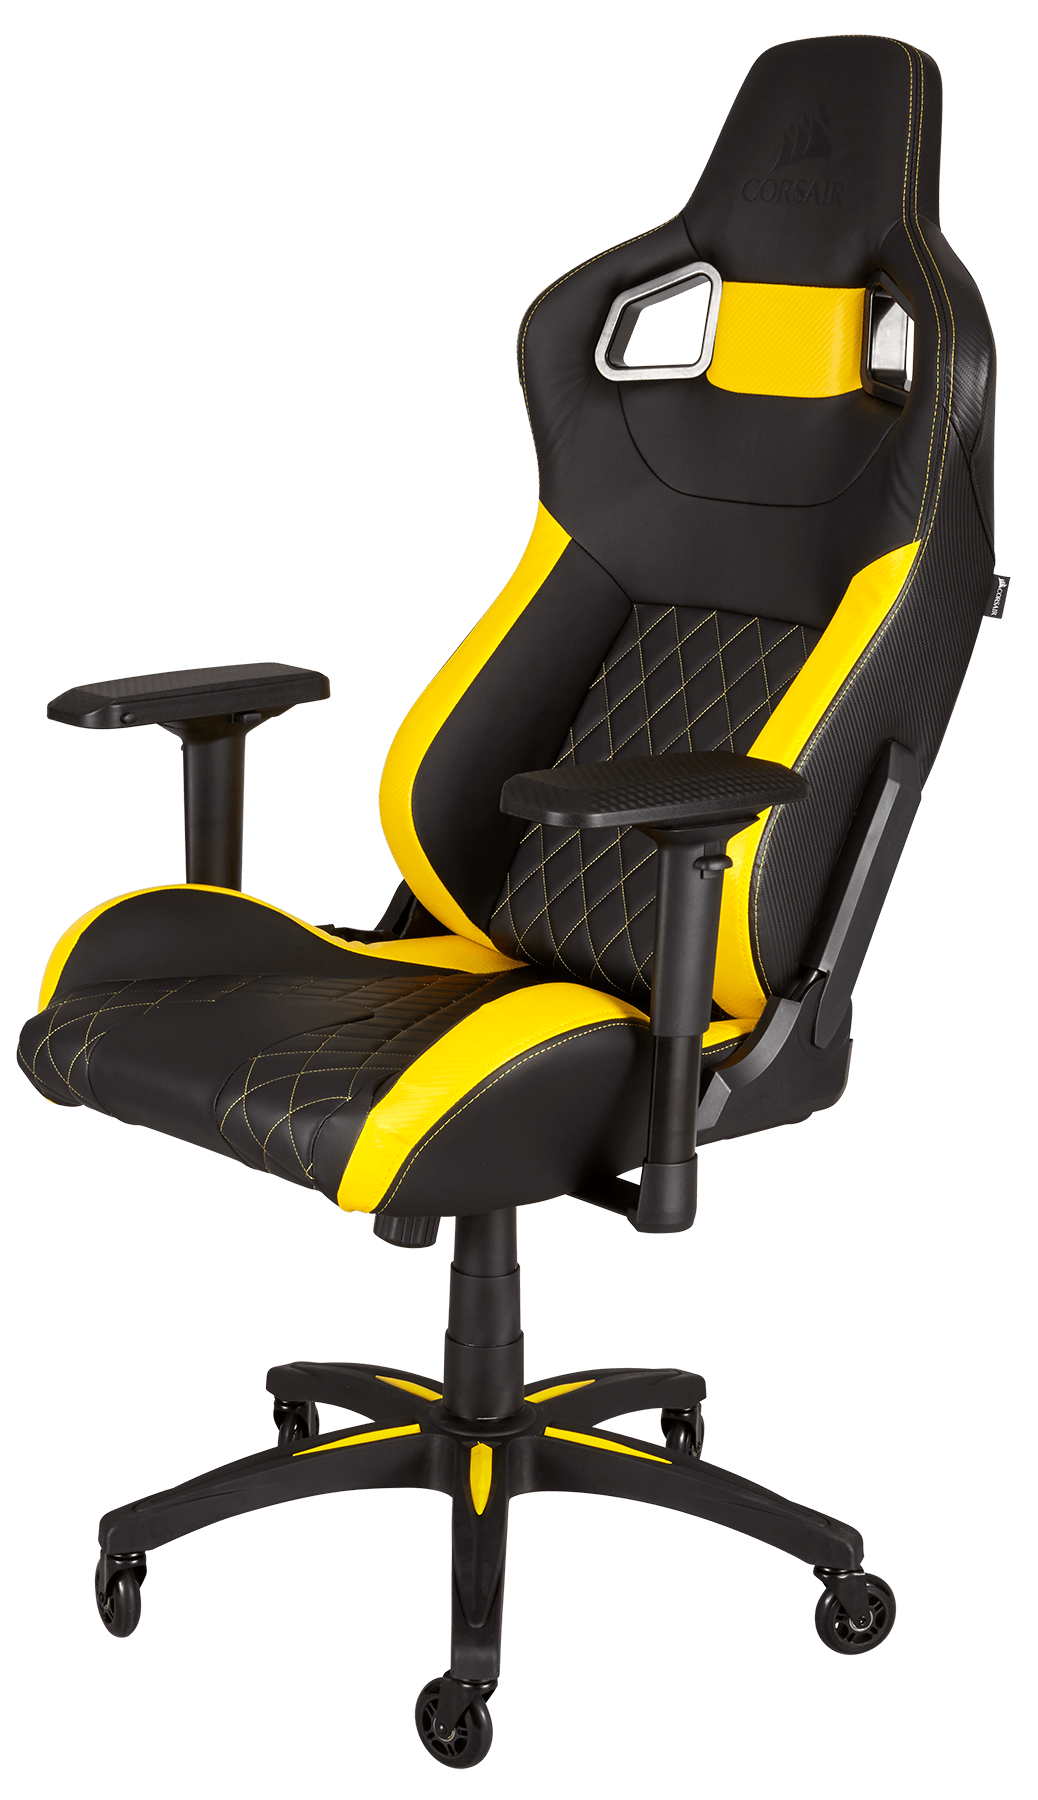 Inspired by Racing, Built to CORSAIR Launches T1 RACE Gaming Chair | CORSAIR Newsroom